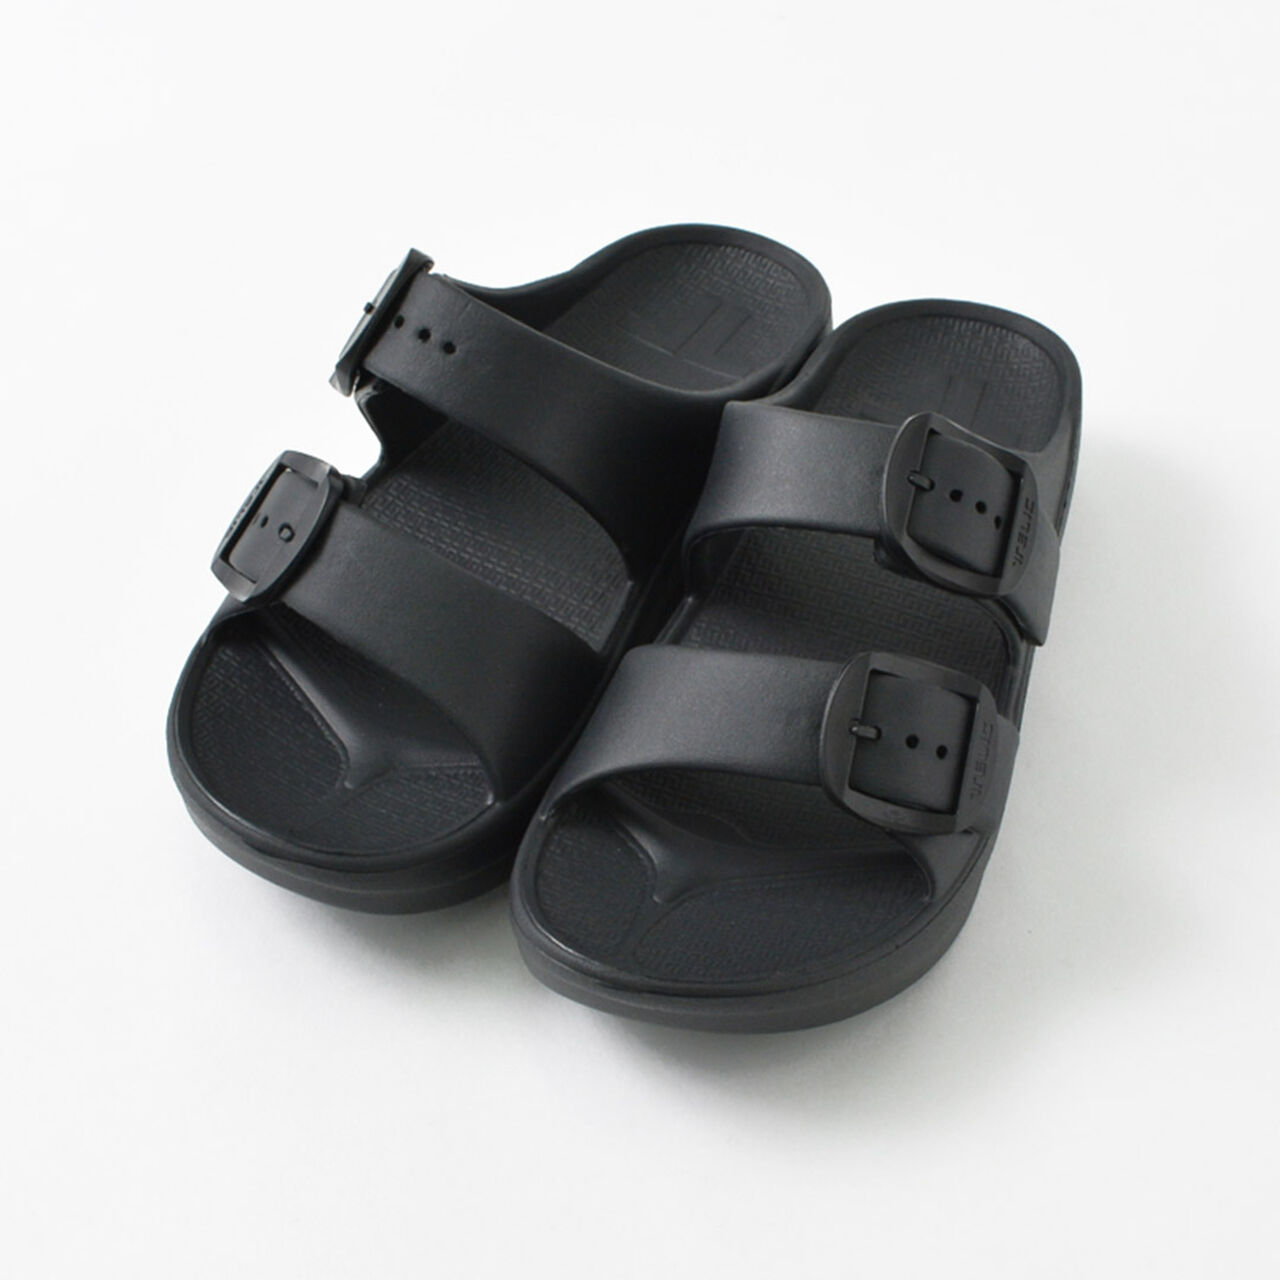 W-Buckle Recovery Sandals,Black, large image number 0